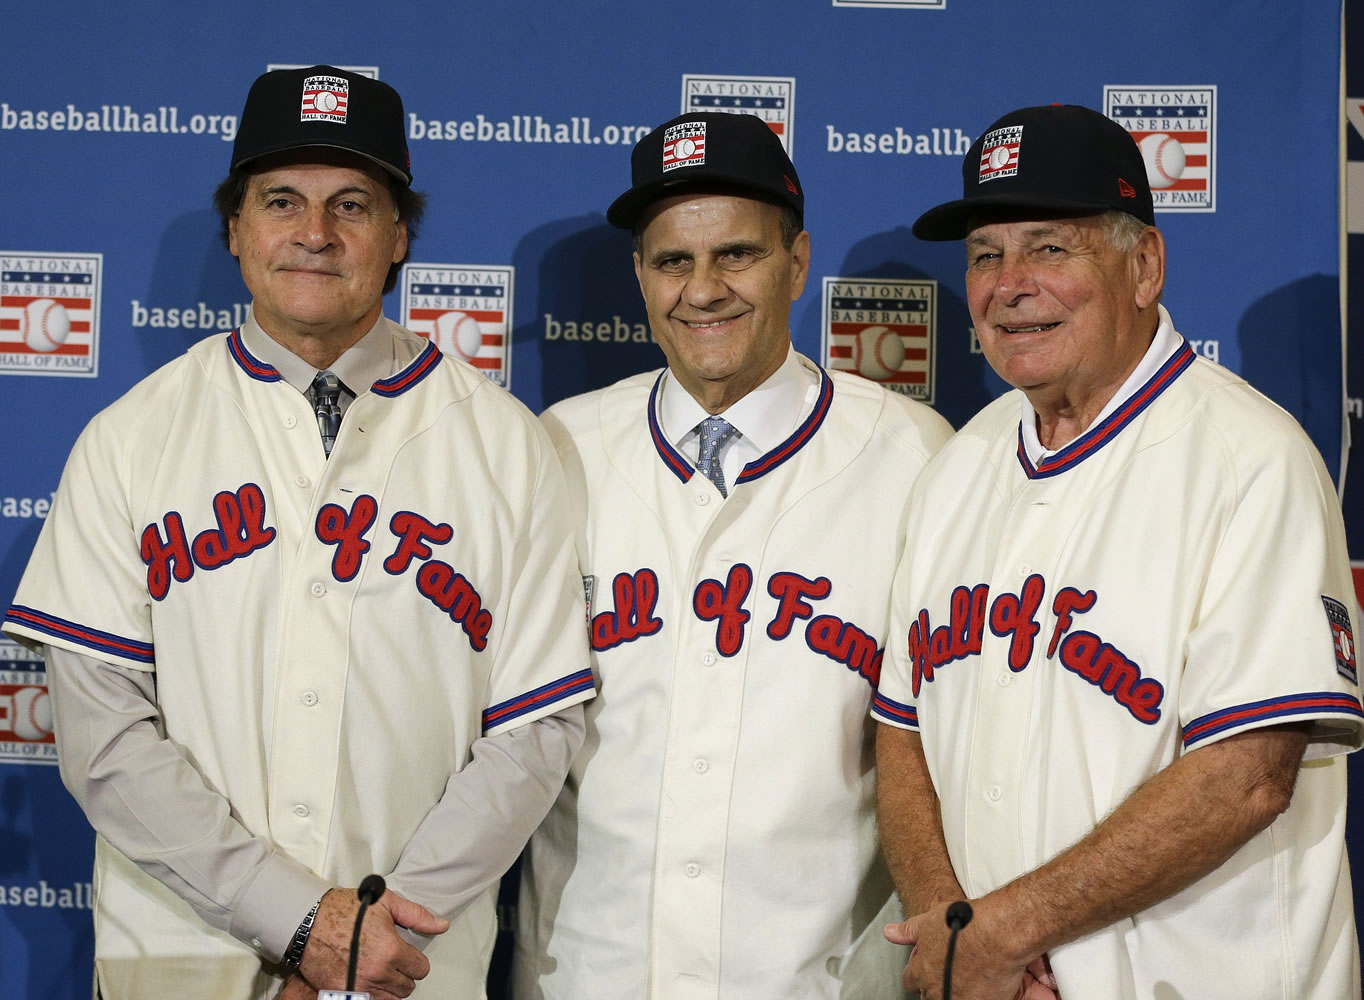 From left, former managers Tony La Russa, Joe Torre and Bobby Cox. All three will be inducted into the Hall of Fame today.